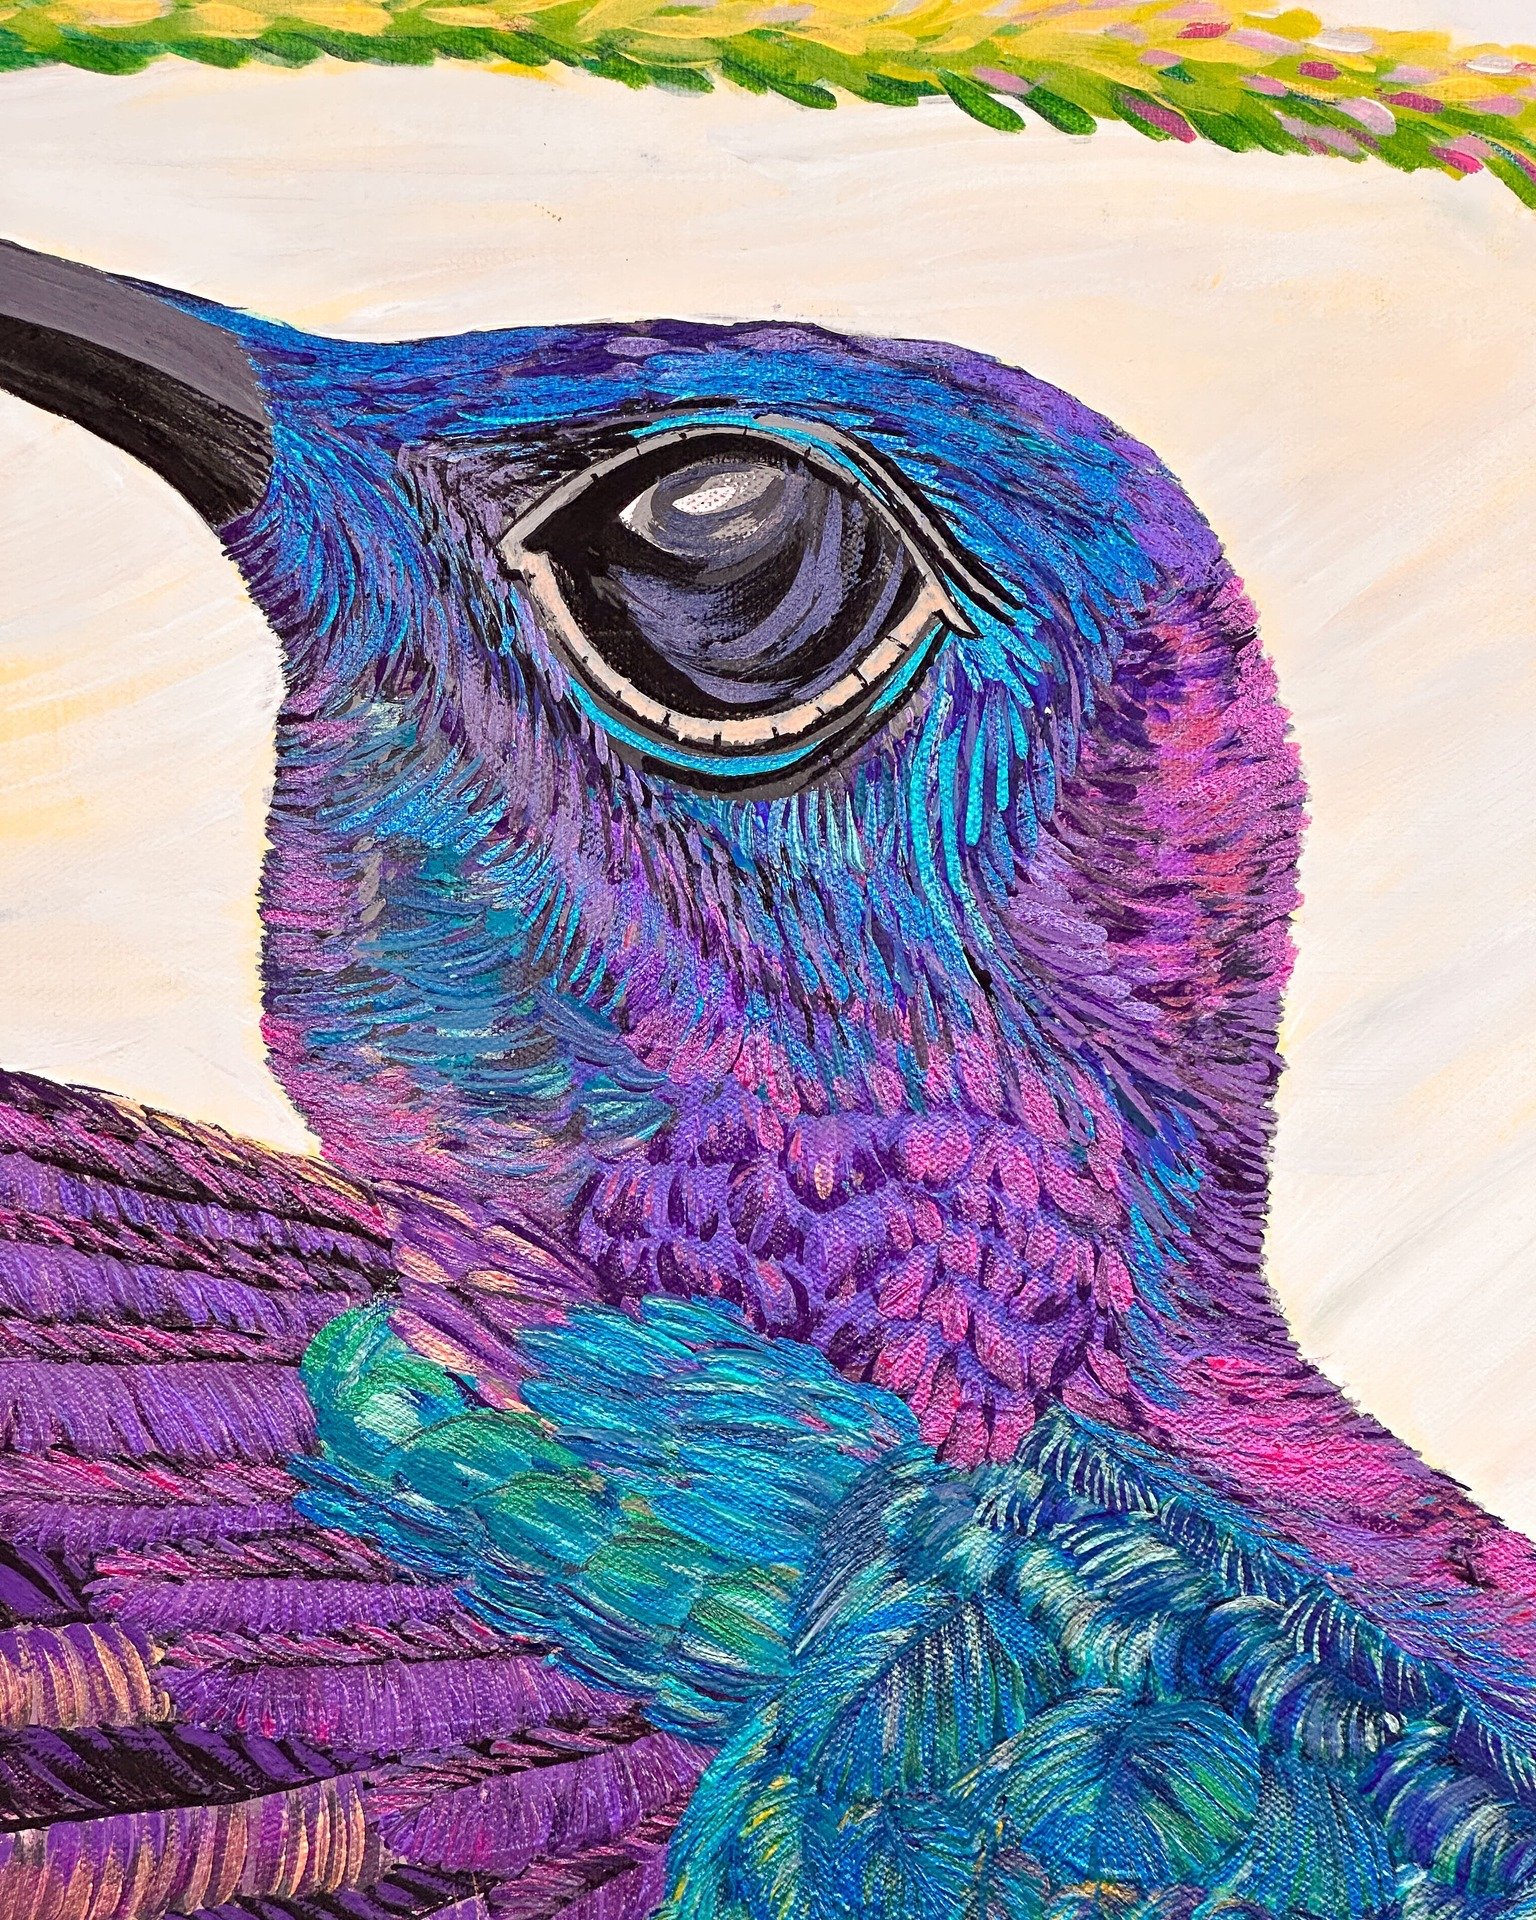 Transform your space into a vivid gallery with &lsquo;Colibr&iacute; Sapphire.&rsquo; A lush, colorful 24x36 inches acrylic on canvas painting. Perfect for the maximalist collector seeking a unique statement.

Let this vivid portrayal of a hummingbir